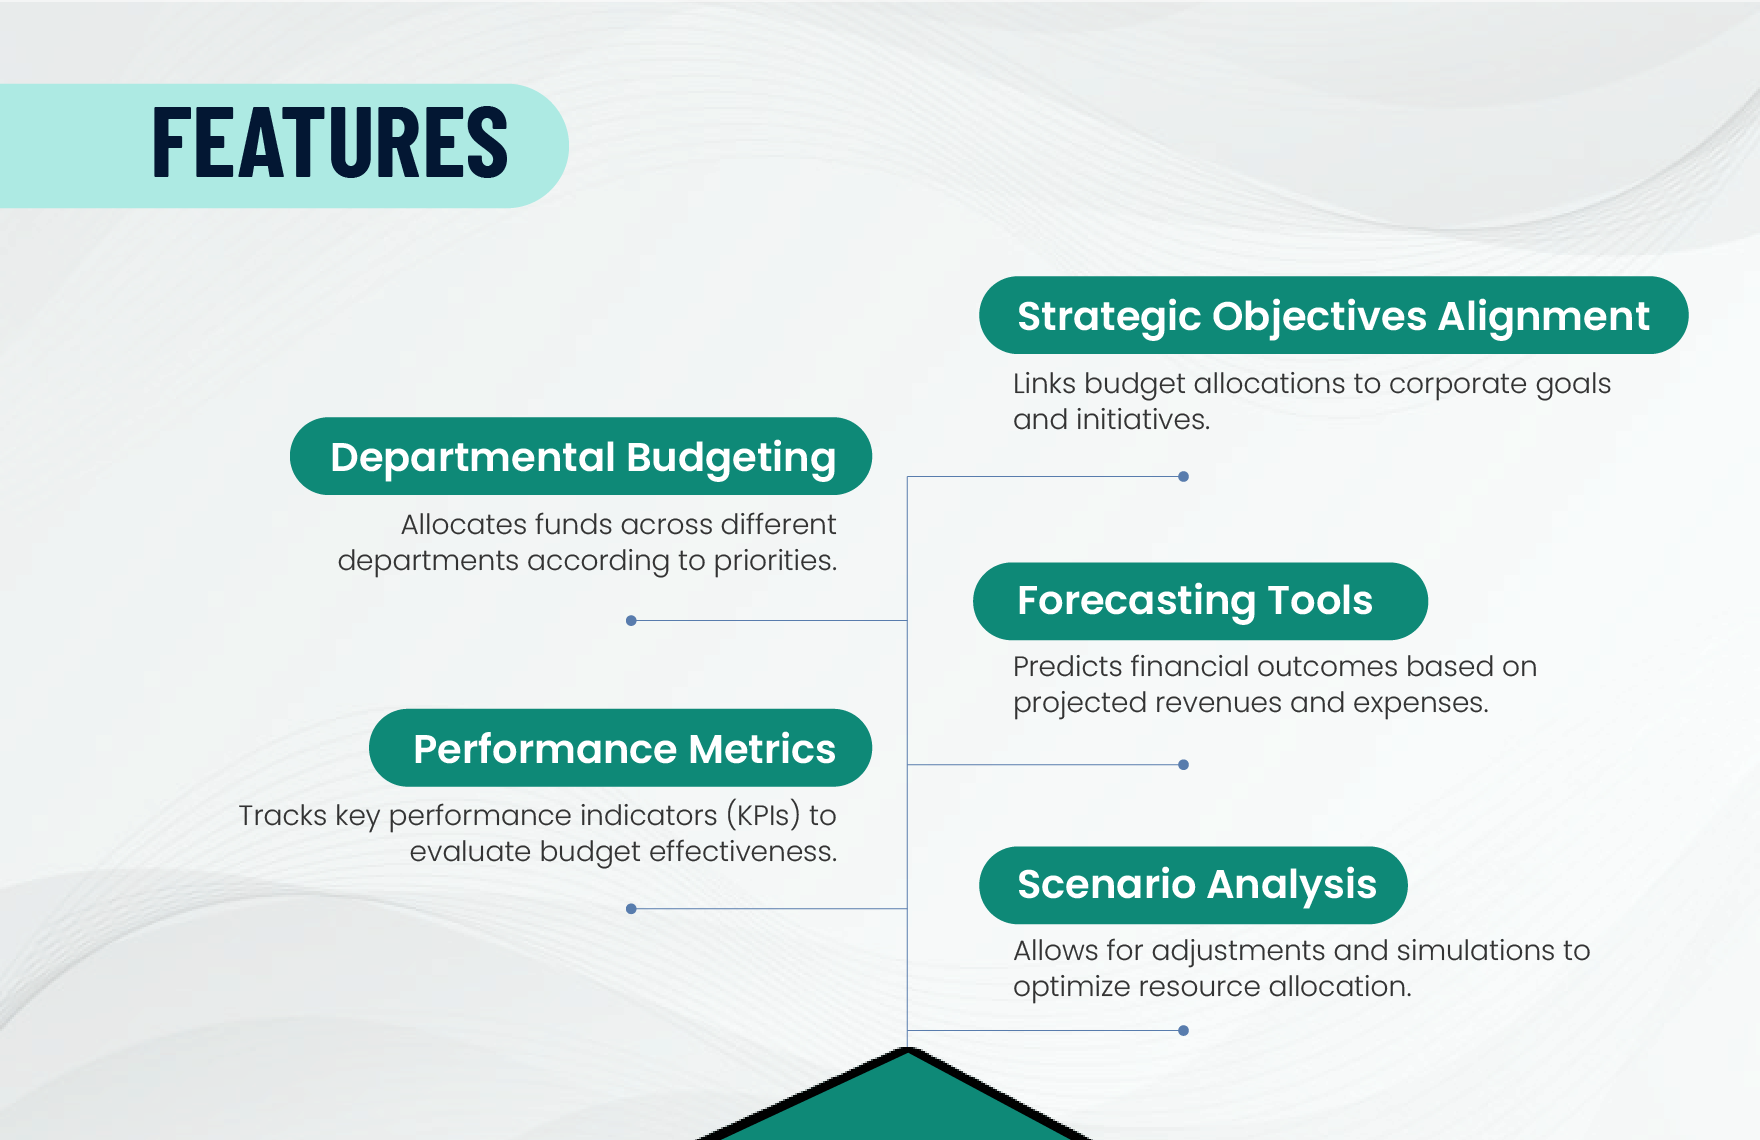 Corporate Business Plan Budget Template